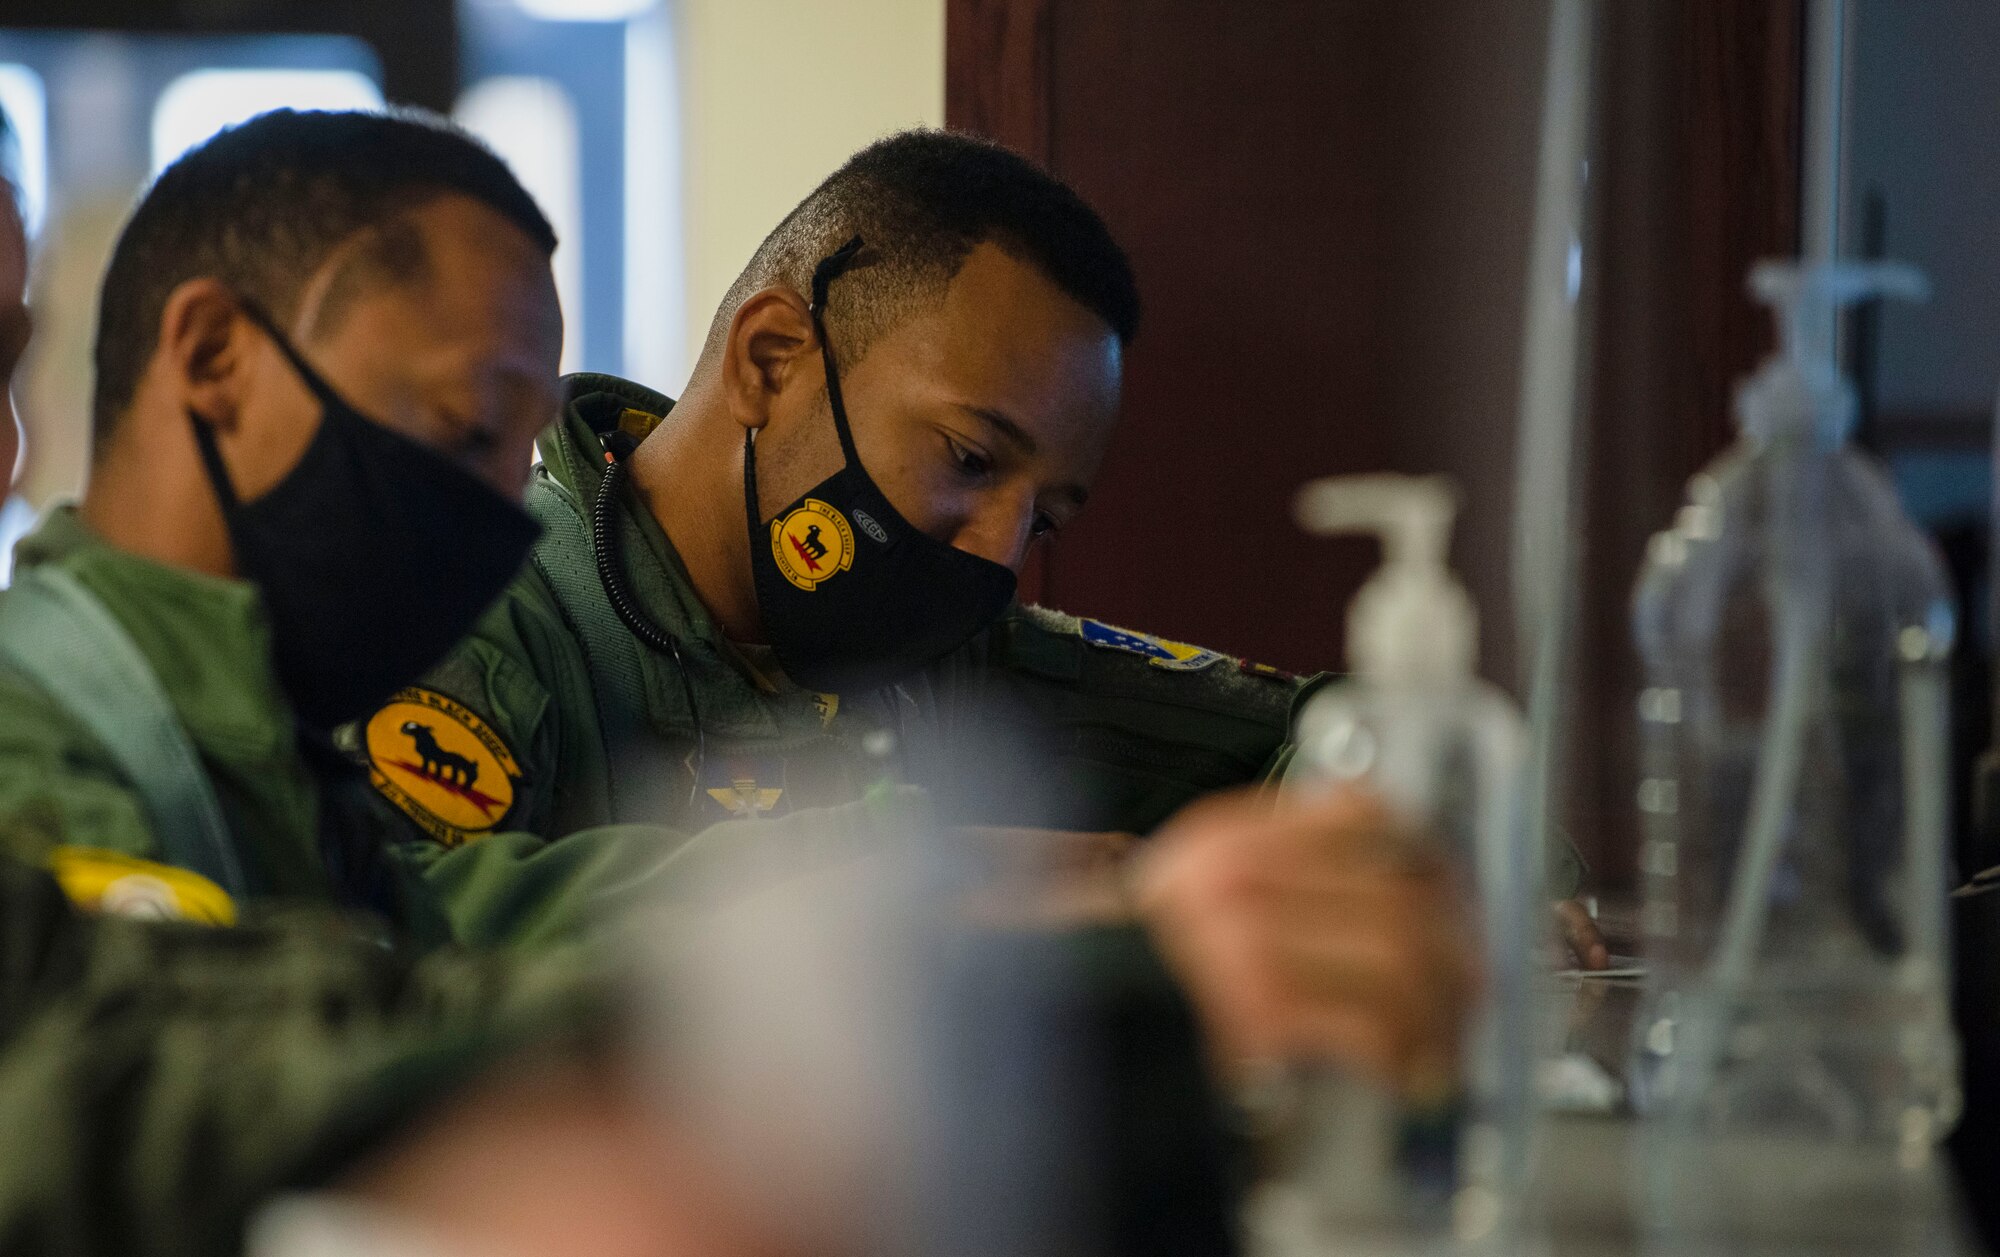 Capt. Michael Craig, left, 311th Fighter Squadron instructor pilot, and Capt. Andre Golson, right, 8th FS IP, are briefed at the step-desk, Feb. 18, 2021, on Holloman Air Force Base, N.M. Two 49th Wing F-16 Viper pilots participated in an all-Black aircrew fly-in. (U.S. Air Force photo by Airman 1st Class Quion Lowe)